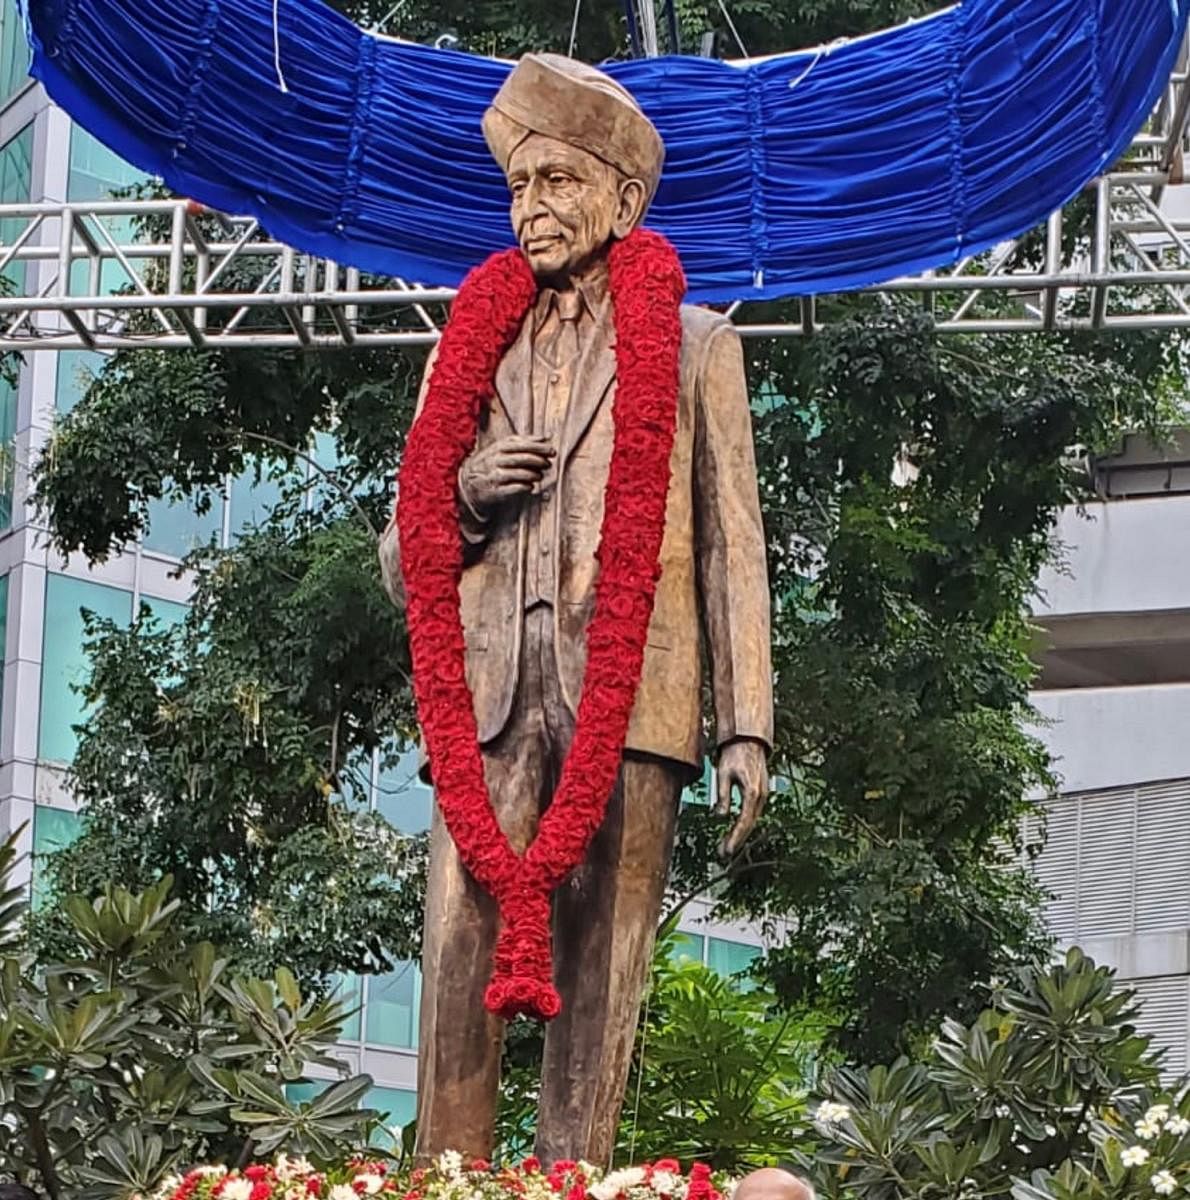 The statue stands outside The Brigade School on the Brigade Gateway campus in Rajajinagar.